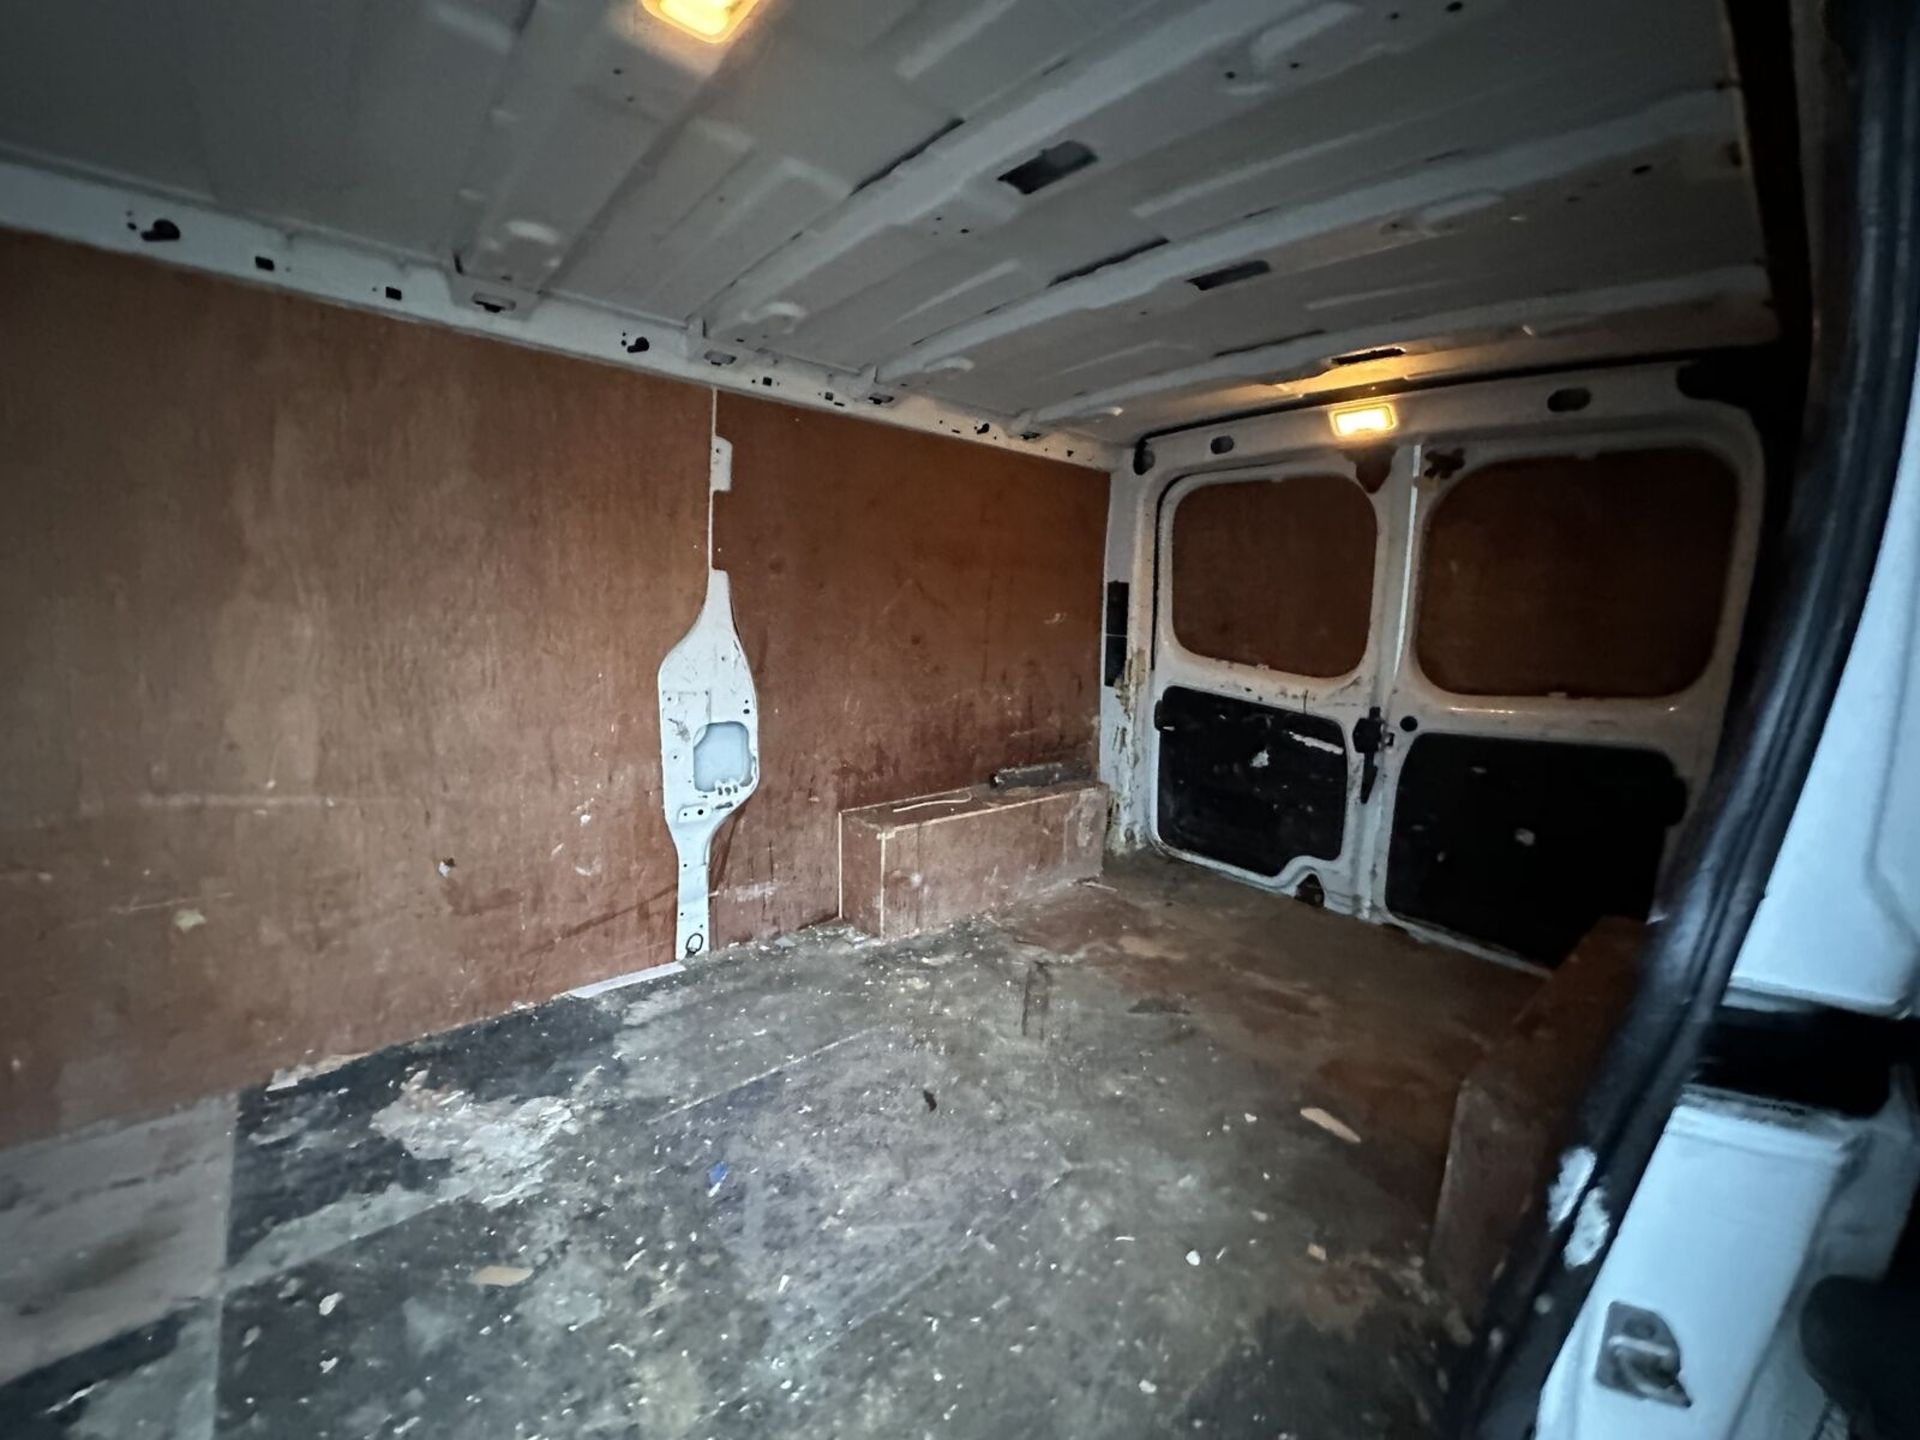 AFFORDABLE REPAIR: VAUXHALL VIVARO WITH POTENTIAL - Image 12 of 21